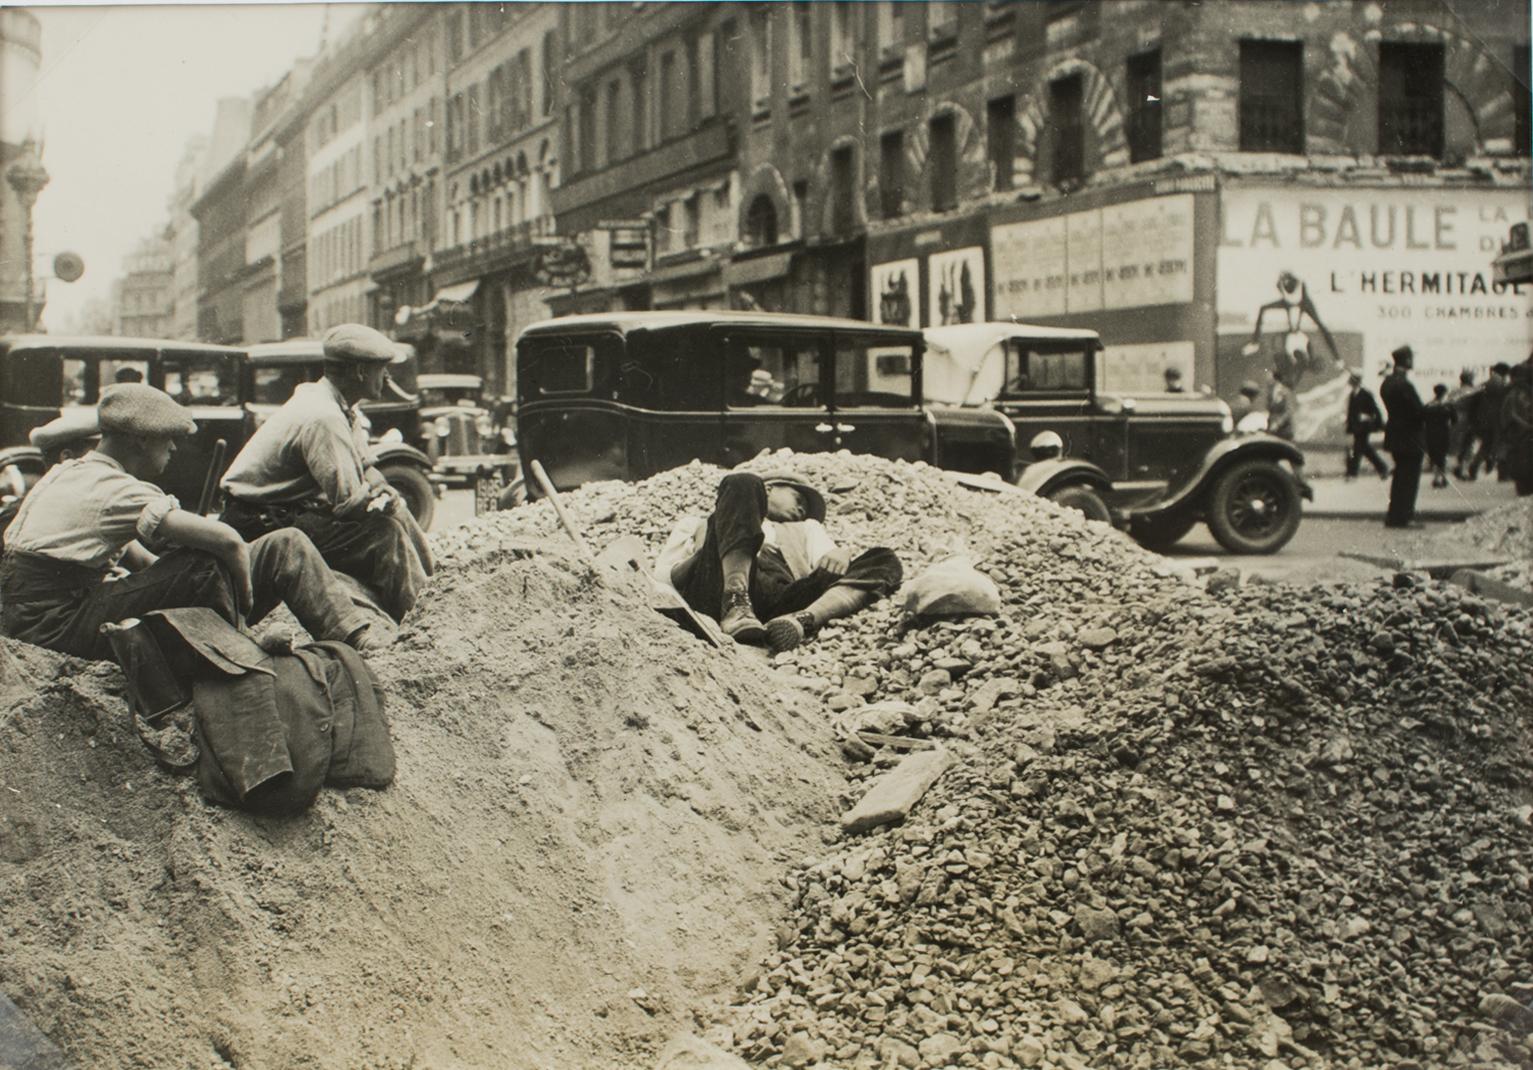 An original silver gelatin black and white photograph by Mondial Photo Presse, Paris, circa 1930. A construction site on a street in Paris.
Features:
Original silver gelatin print photograph unframed.
Press photograph.
Press agency: Mondial Photo